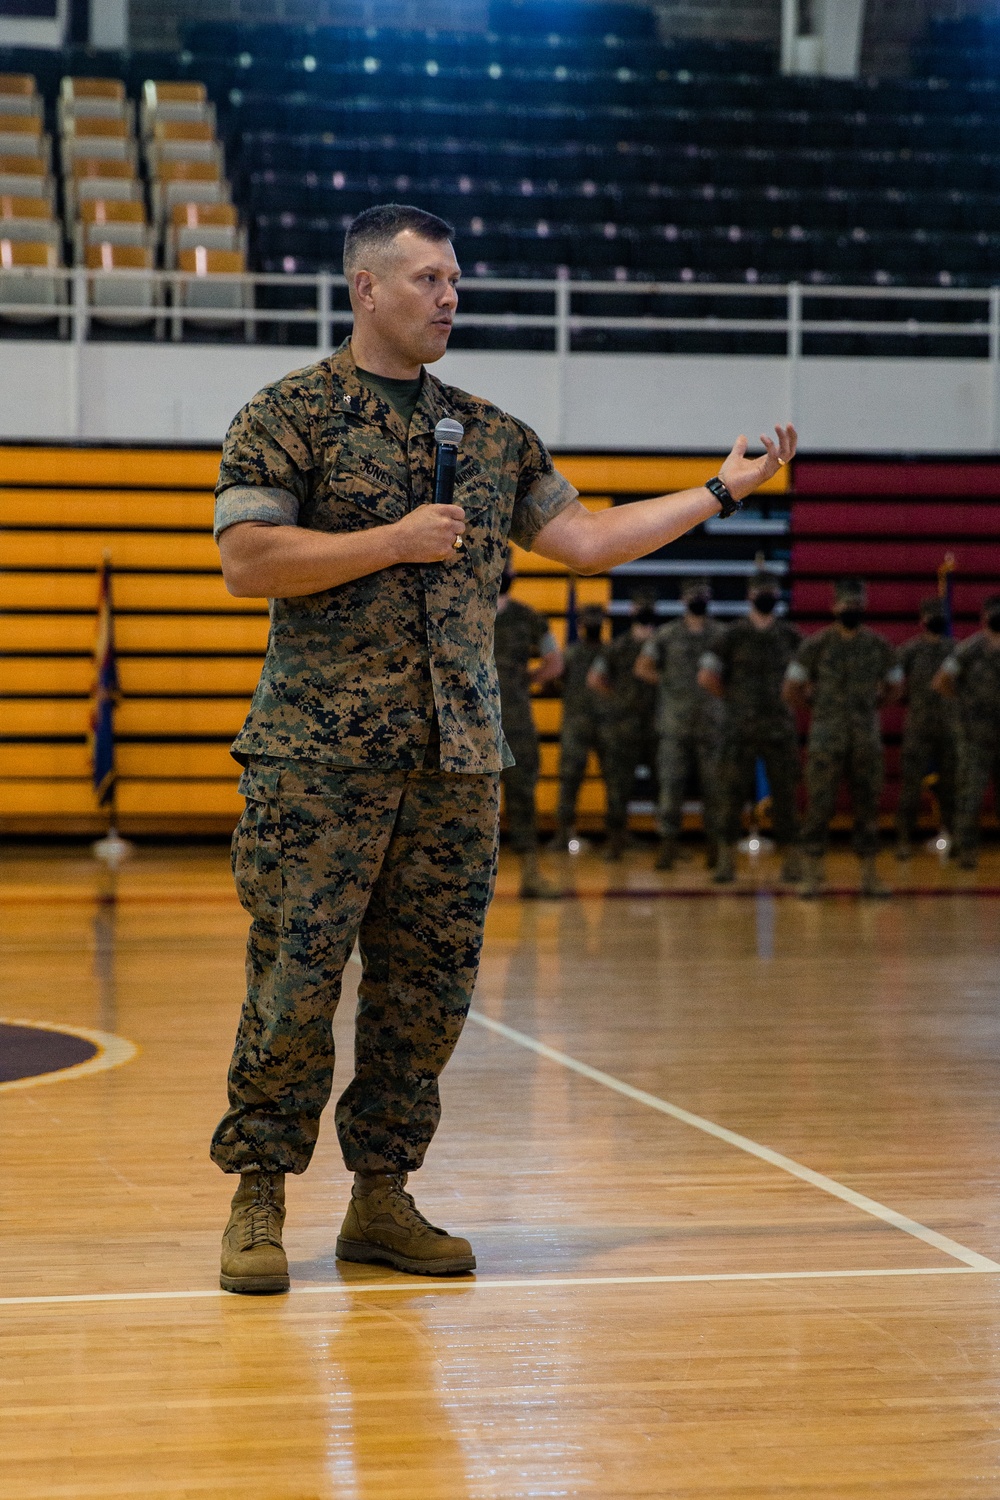 U.S. Marine Corps Col. Gregory L. Jones, the outgoing commanding officer, Headquarters Battalion, 2d Marine Division, gives remarks after a change of command ceremony on Camp Lejeune North Carolina, July 24, 2020. The ceremony represents the transfer of a